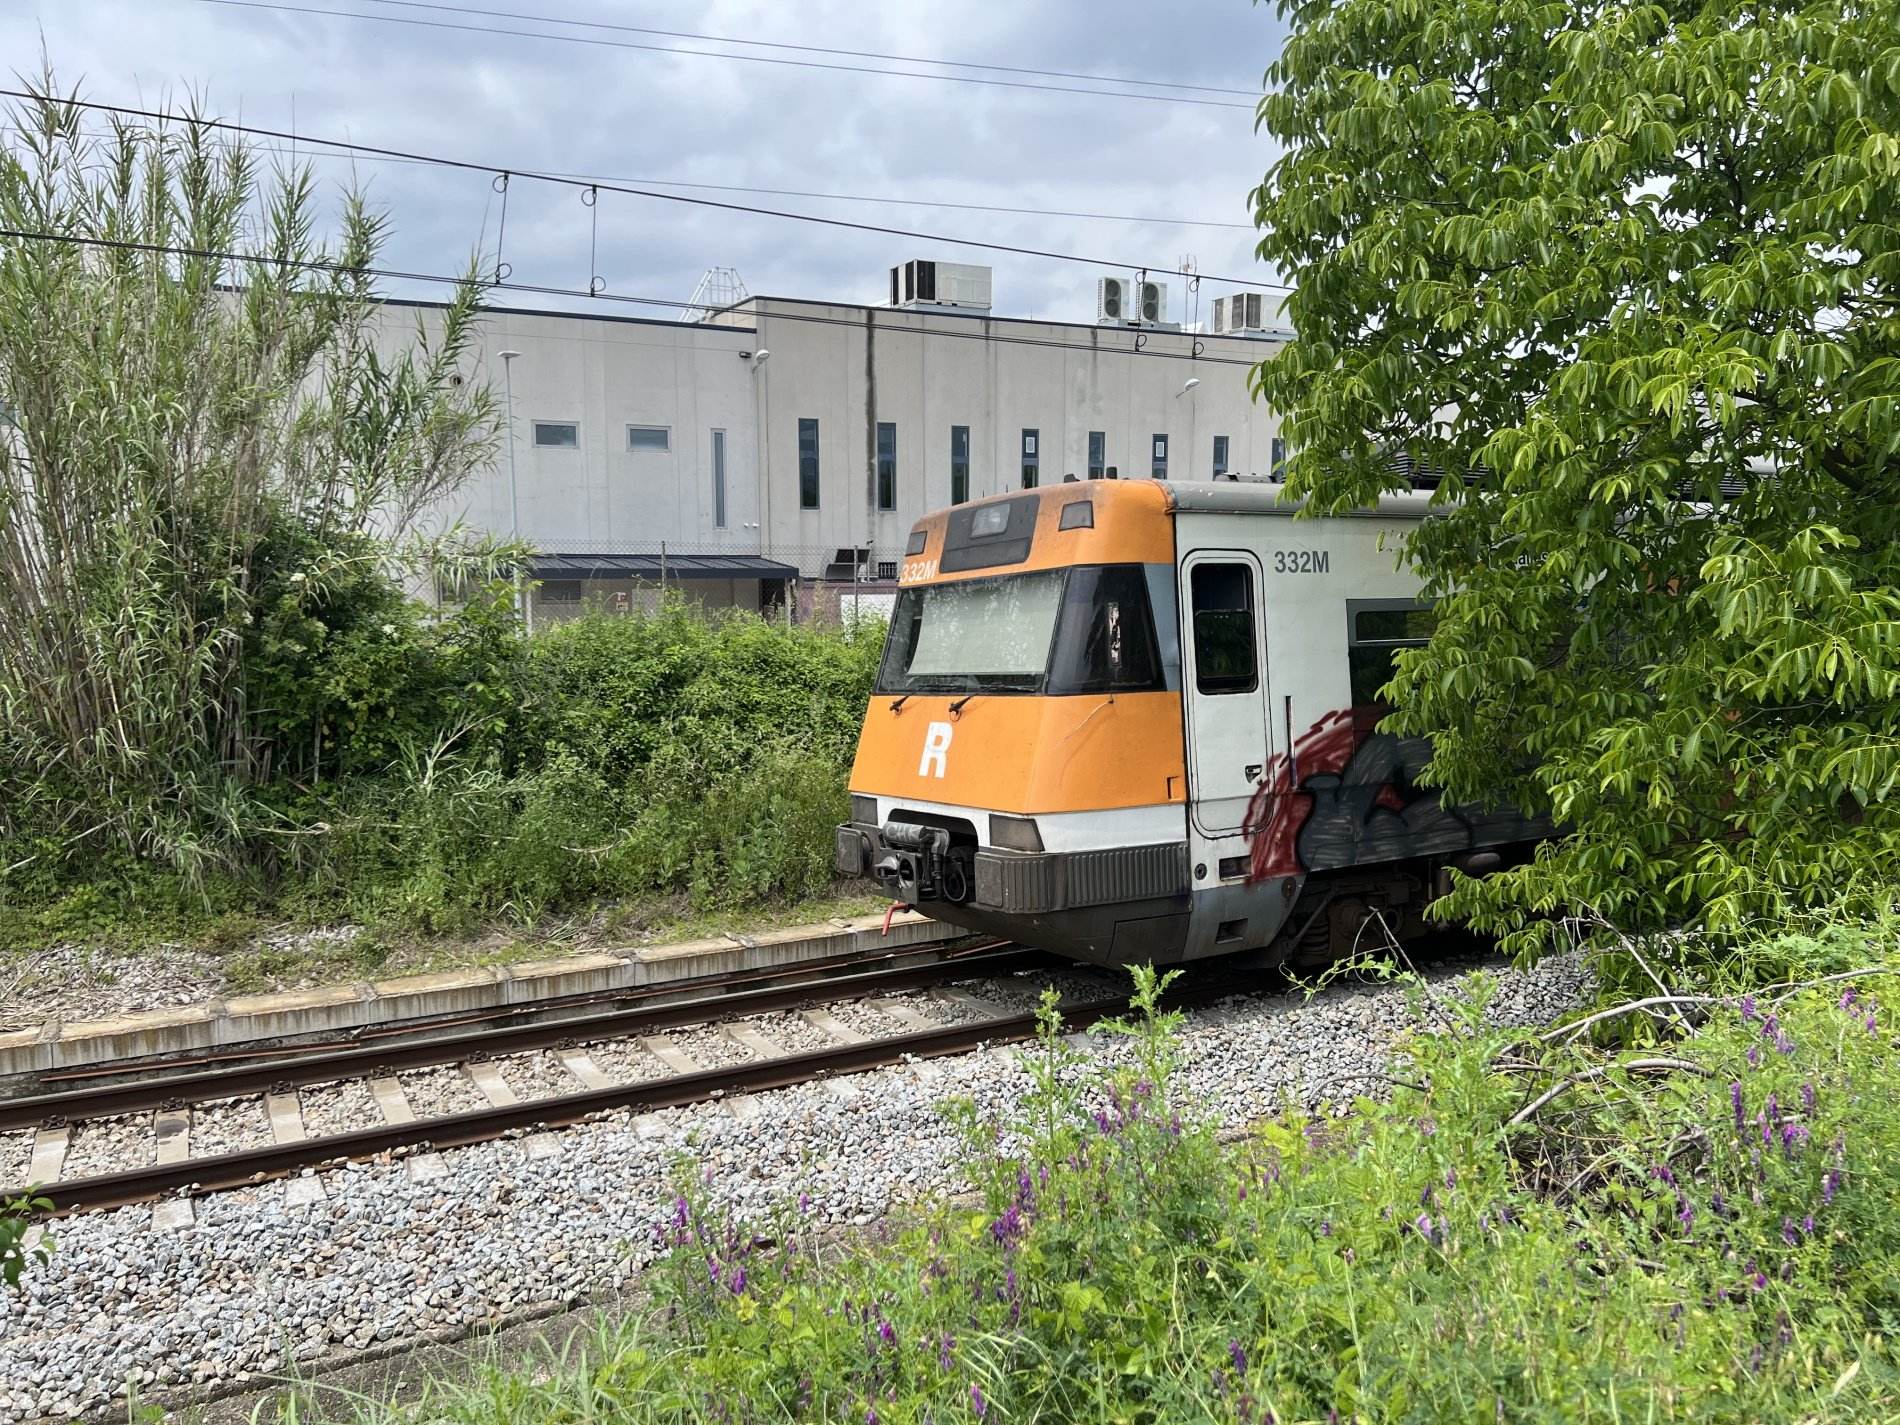 Spanish train conductor caught having sex in locomotive: cause of yet another 'Rodalies' rail delay